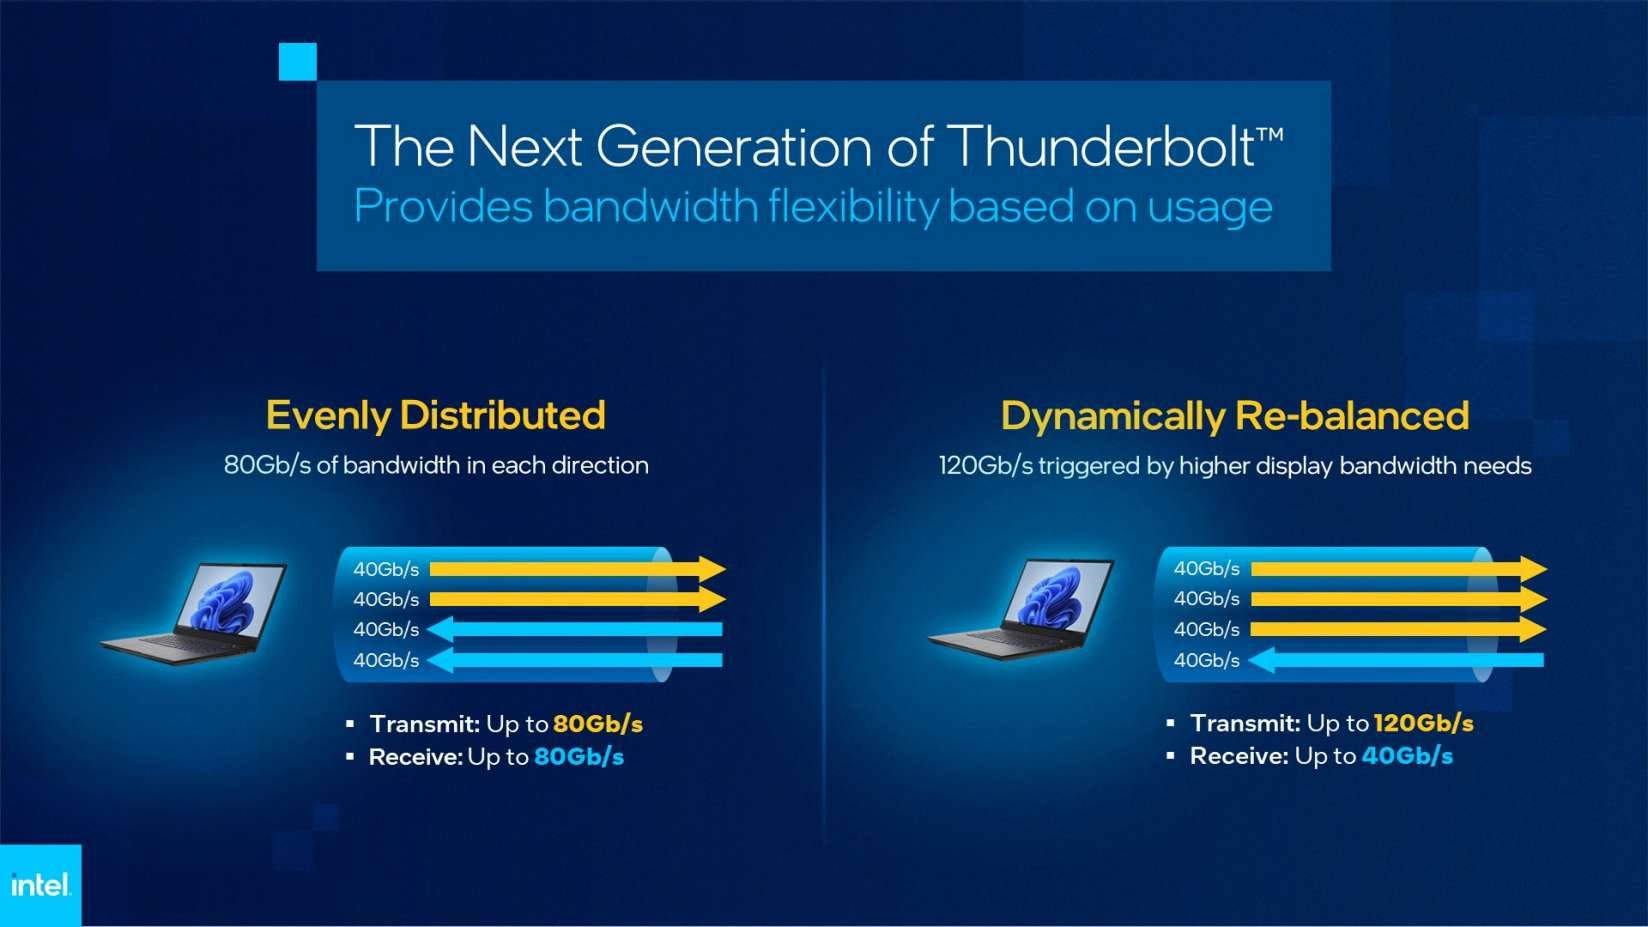 Intel Demonstrates Early Prototype For Next-Gen Thunderbolt Based On Newly Releases USB4 V2 Spec